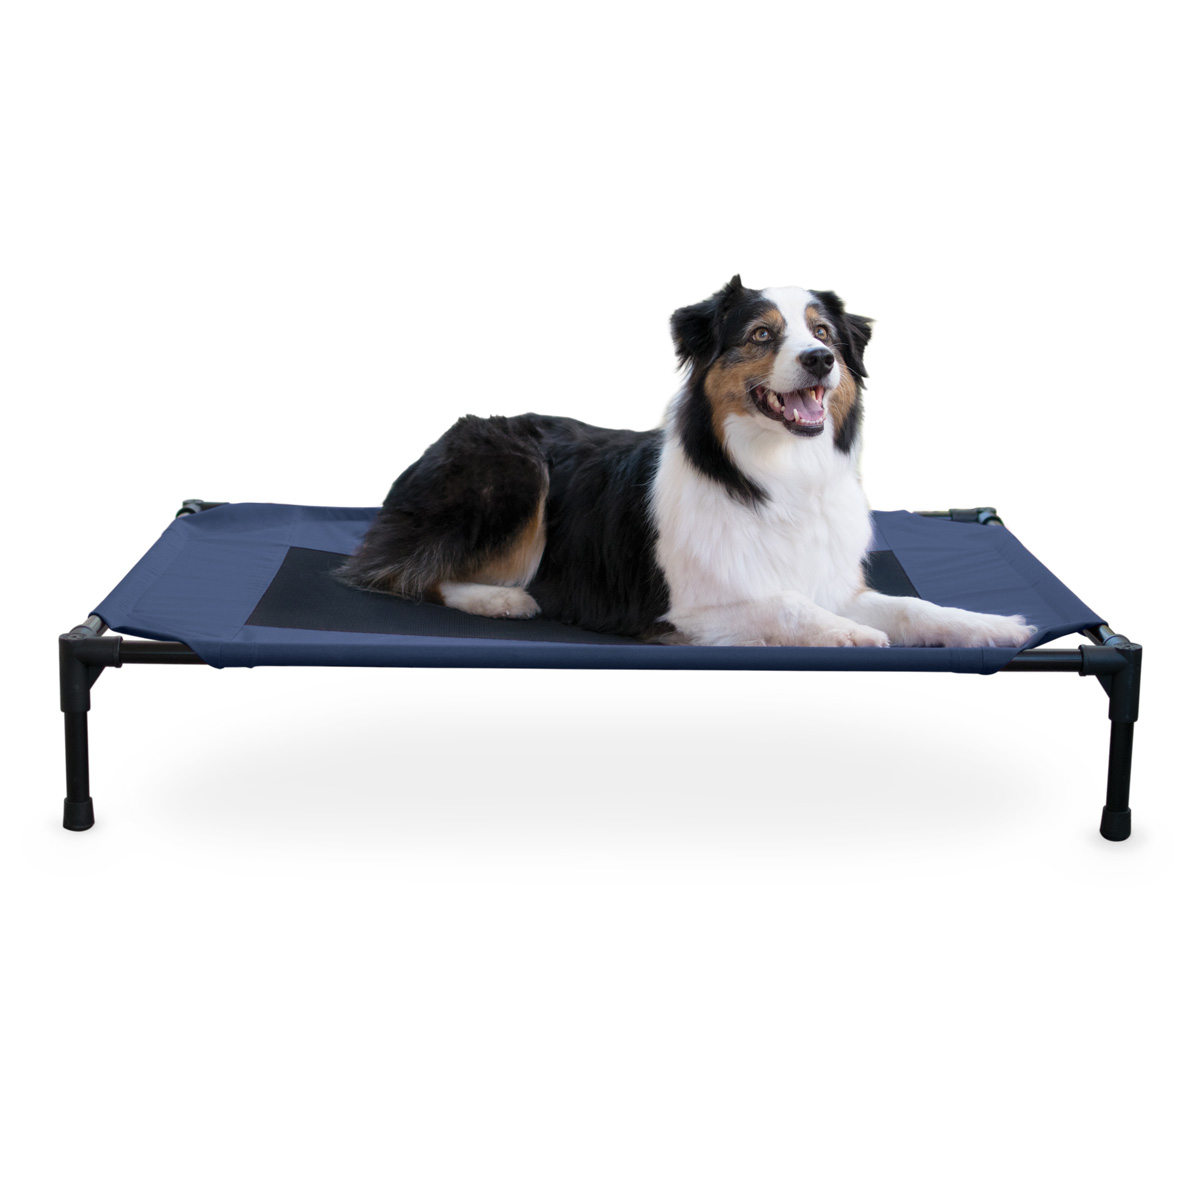 K & H Pet Products Elevated Pet Bed - Large